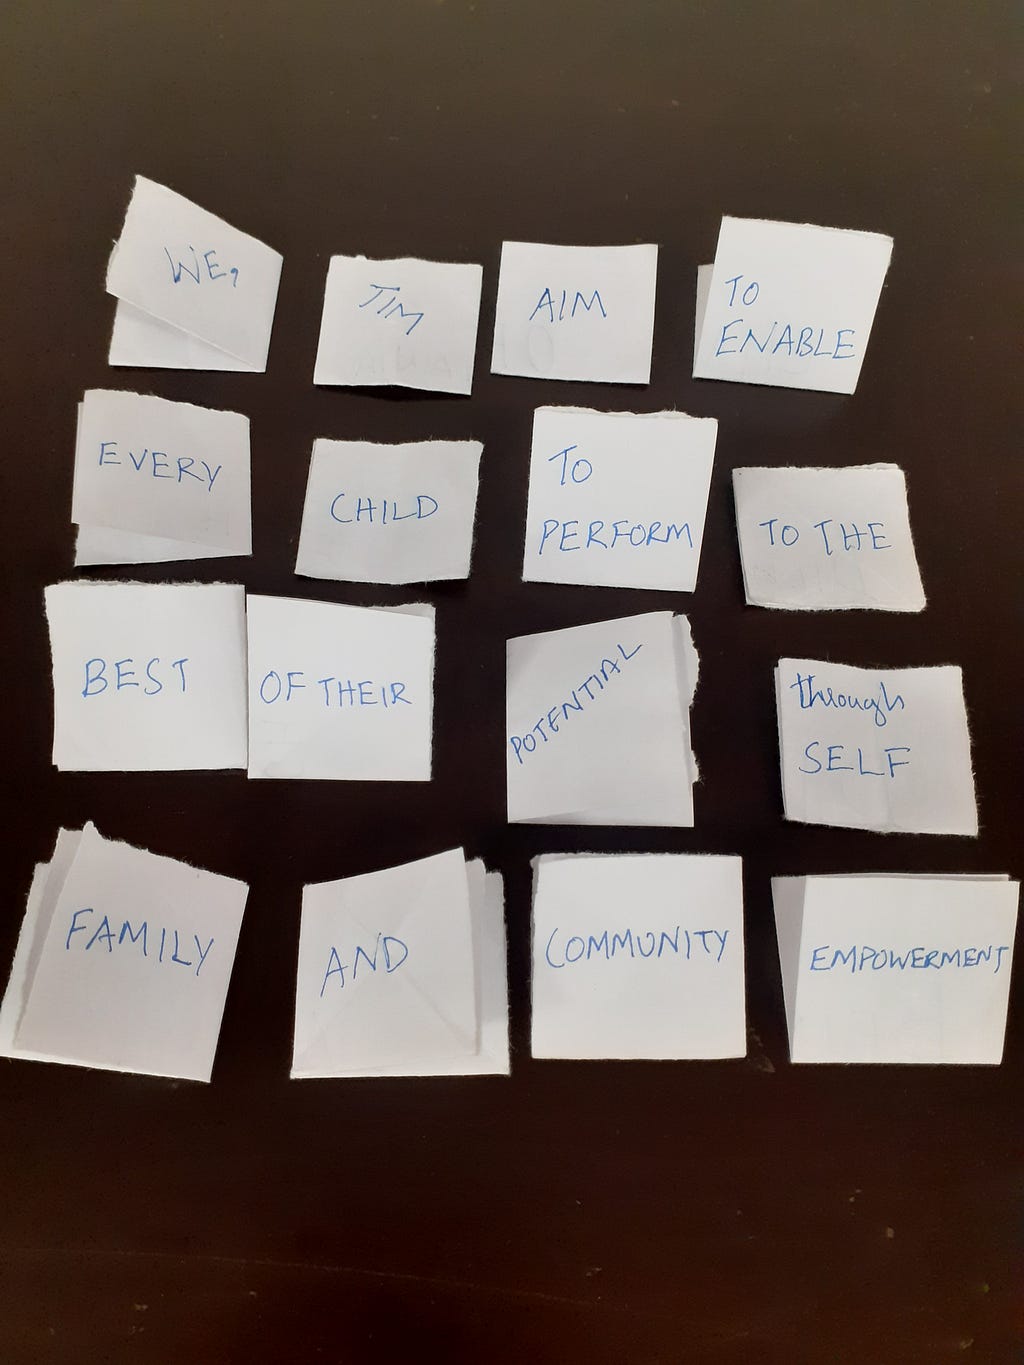 One of the activities in which each team member had a piece of sheet, and when everything was put together and arranged, it formed the vision statement.